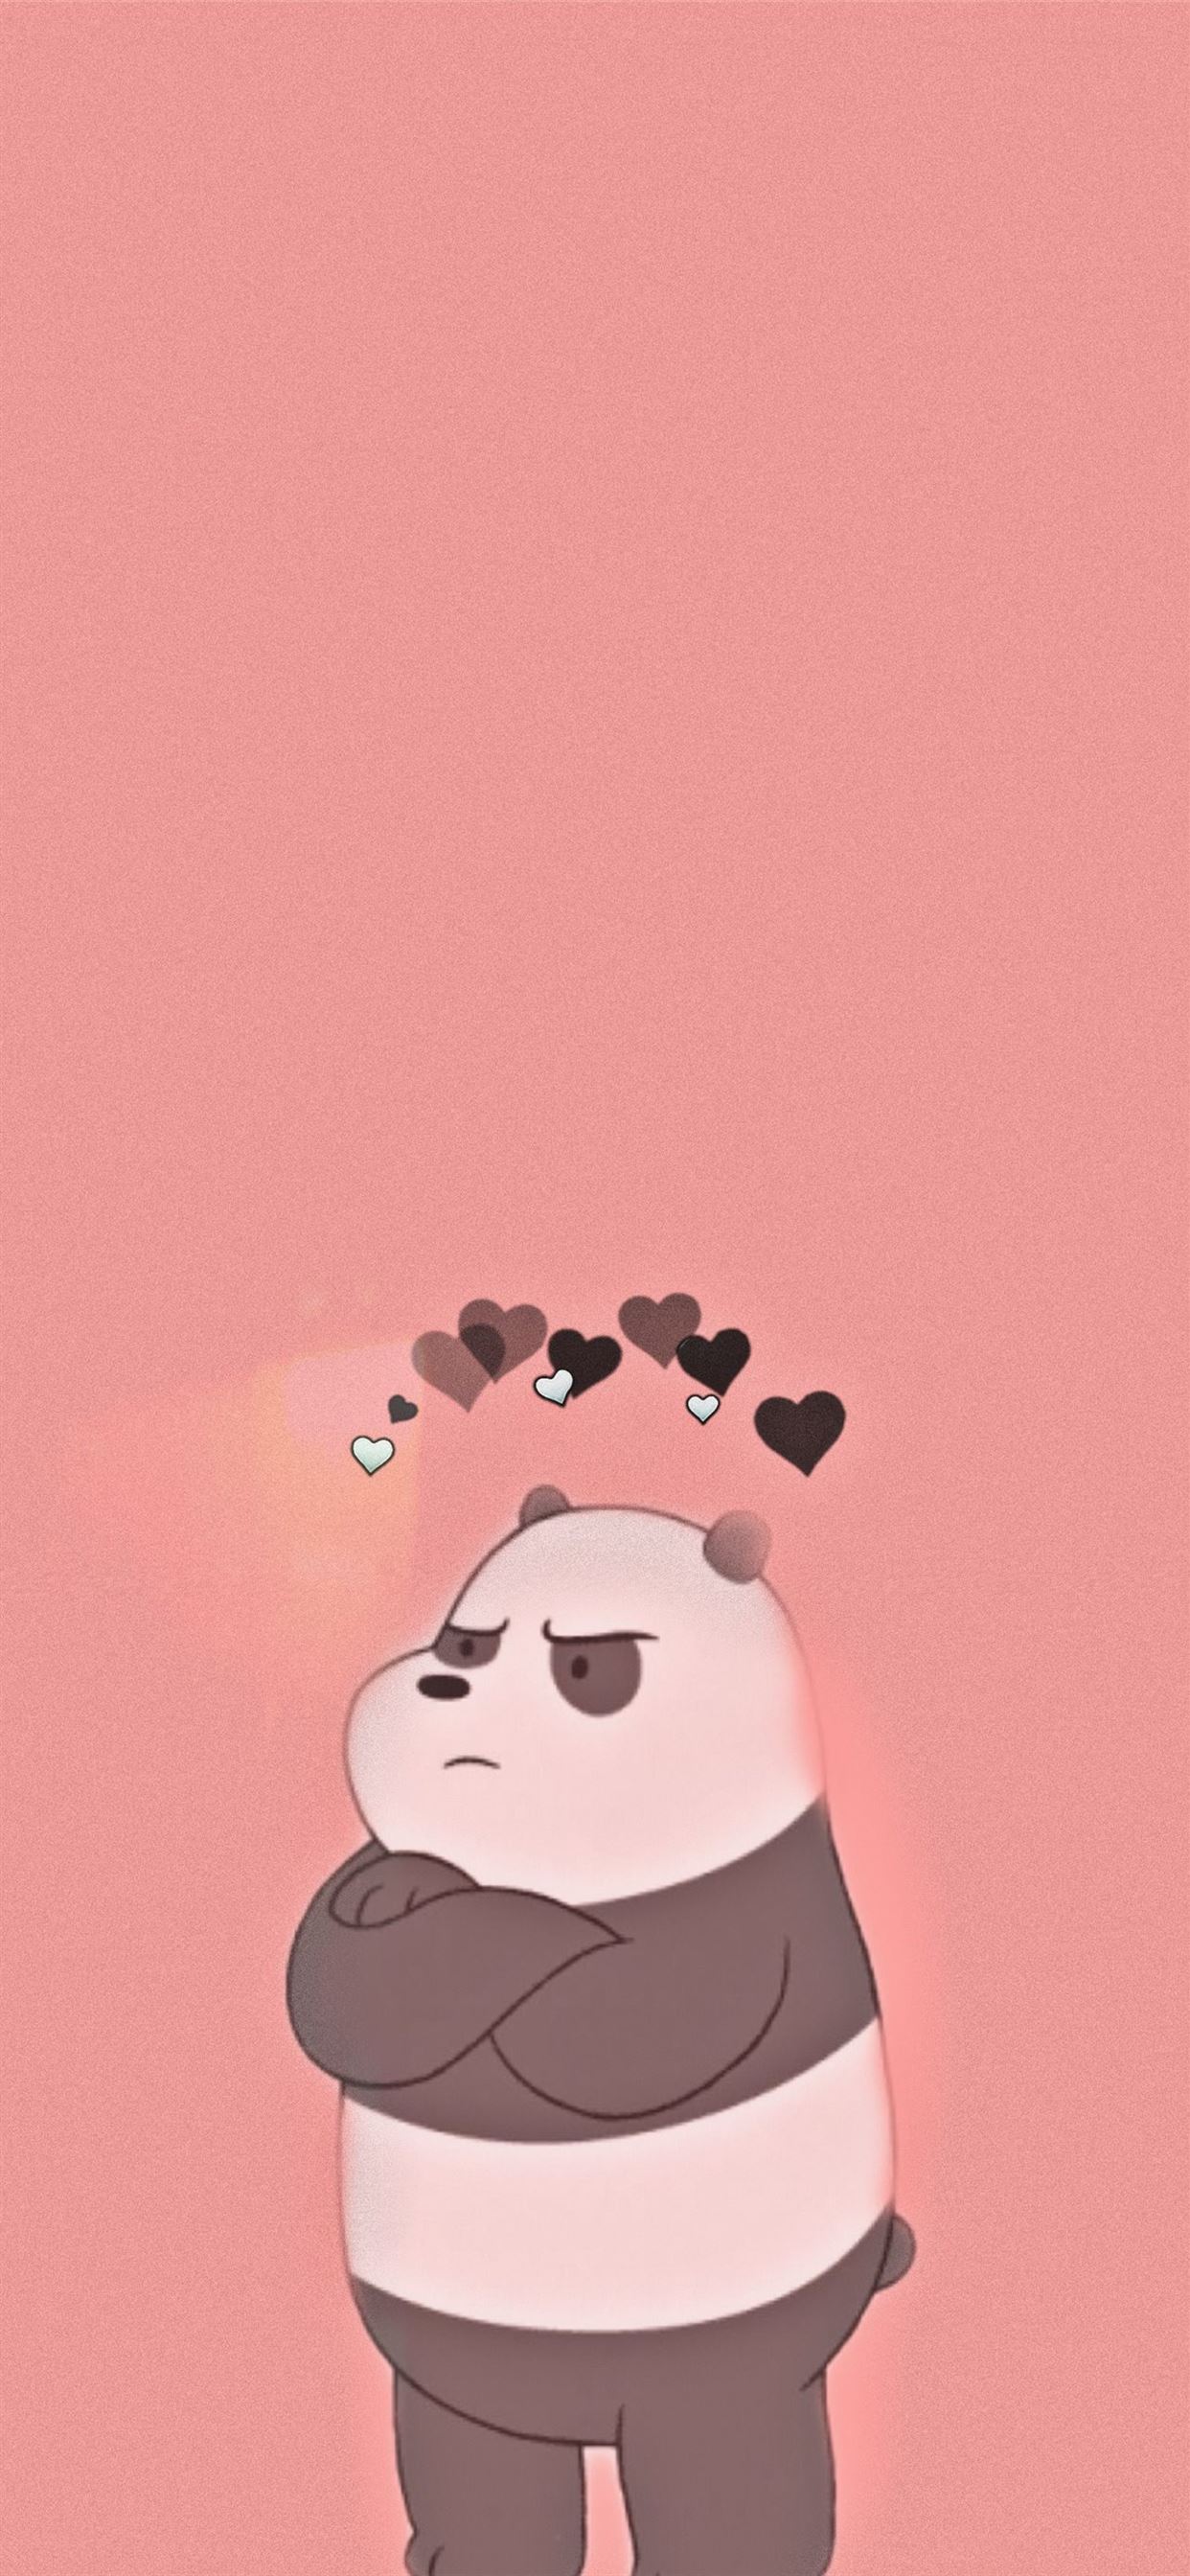 We bare bears iPhone Wallpapers Free Download